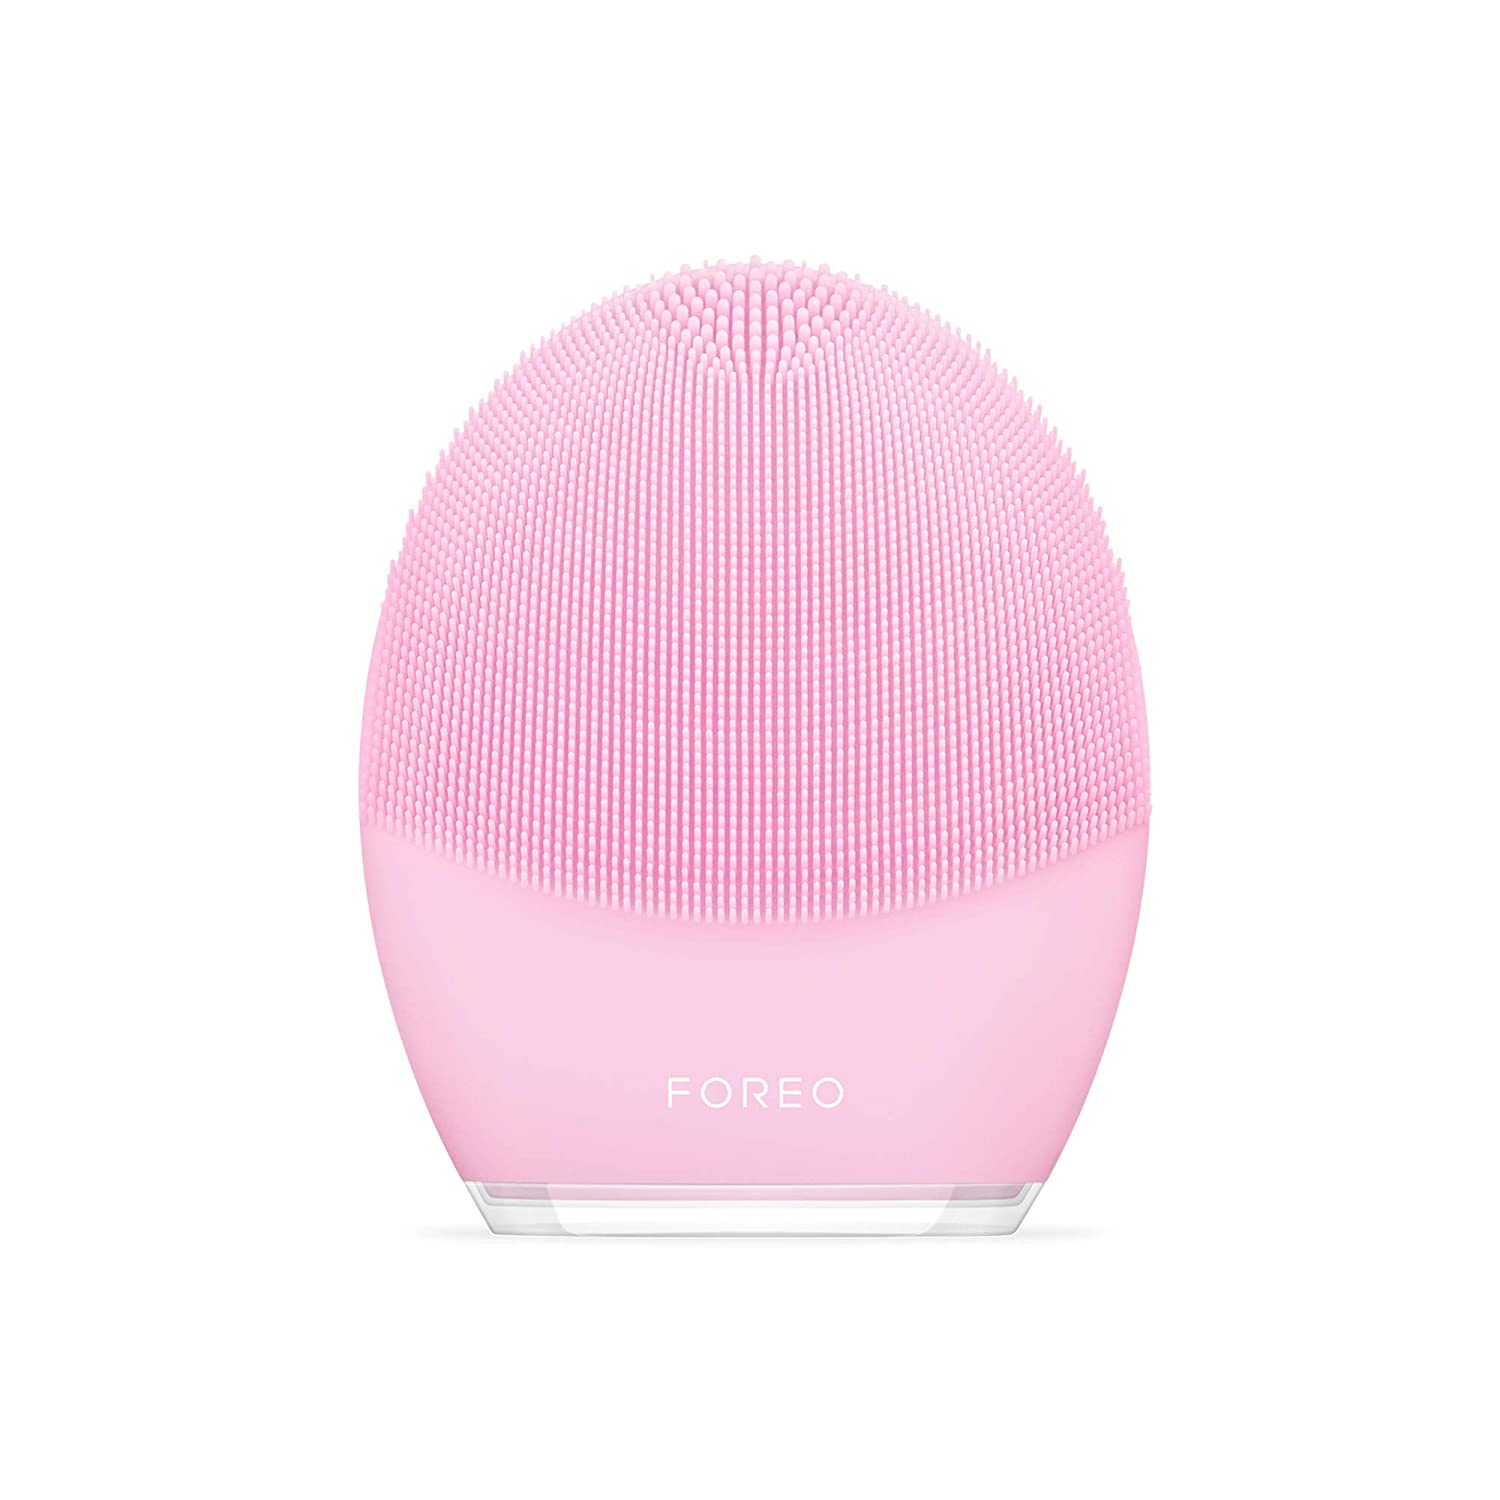 FOREO LUNA 3 for Normal, Combination and Sensitive Skin, Smart Facial Cleansing and Firming Massage Brush for Spa at Home $139.30